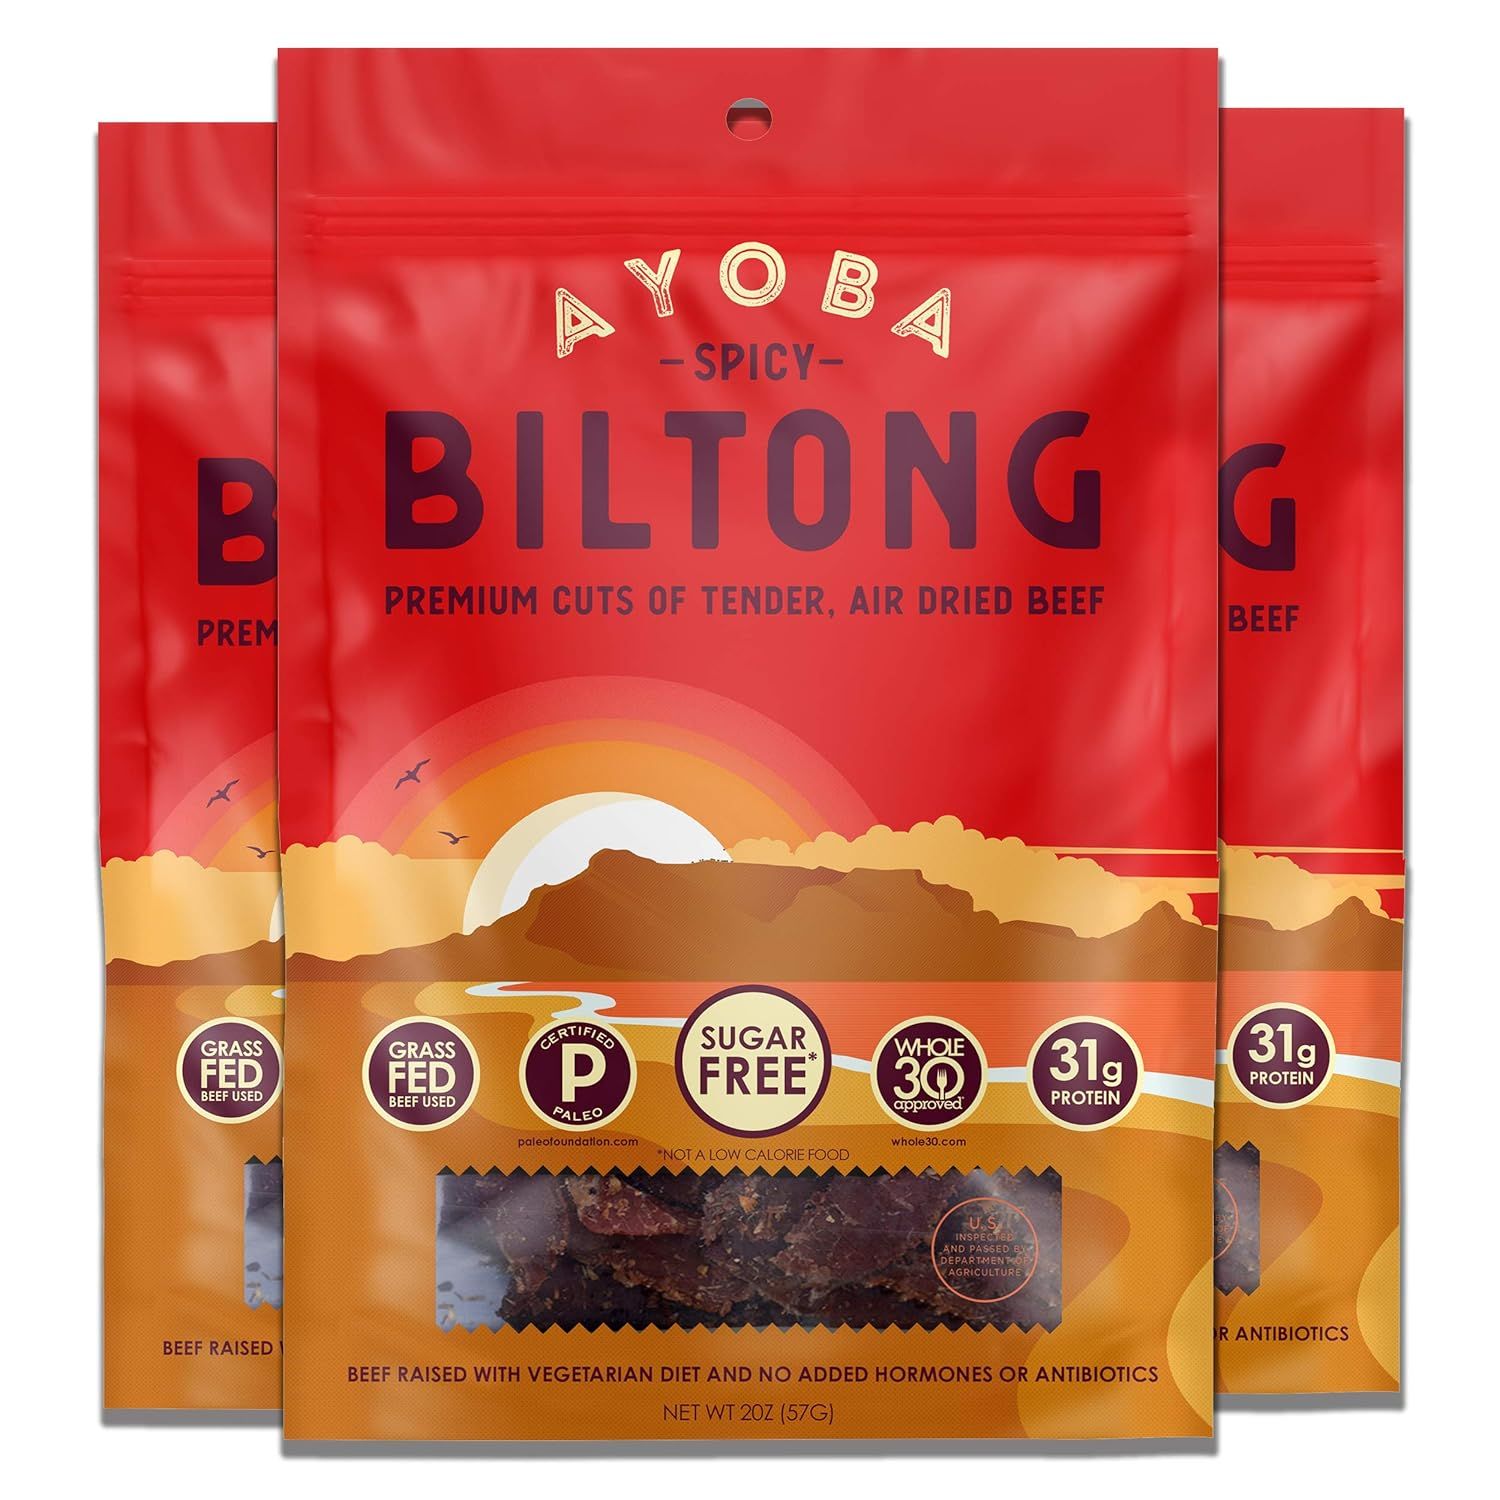 Ayoba Spicy Biltong - Grass Fed, Keto and Paleo Certified Air-Dried Beef Snack - Better Than Jerk... | Amazon (US)